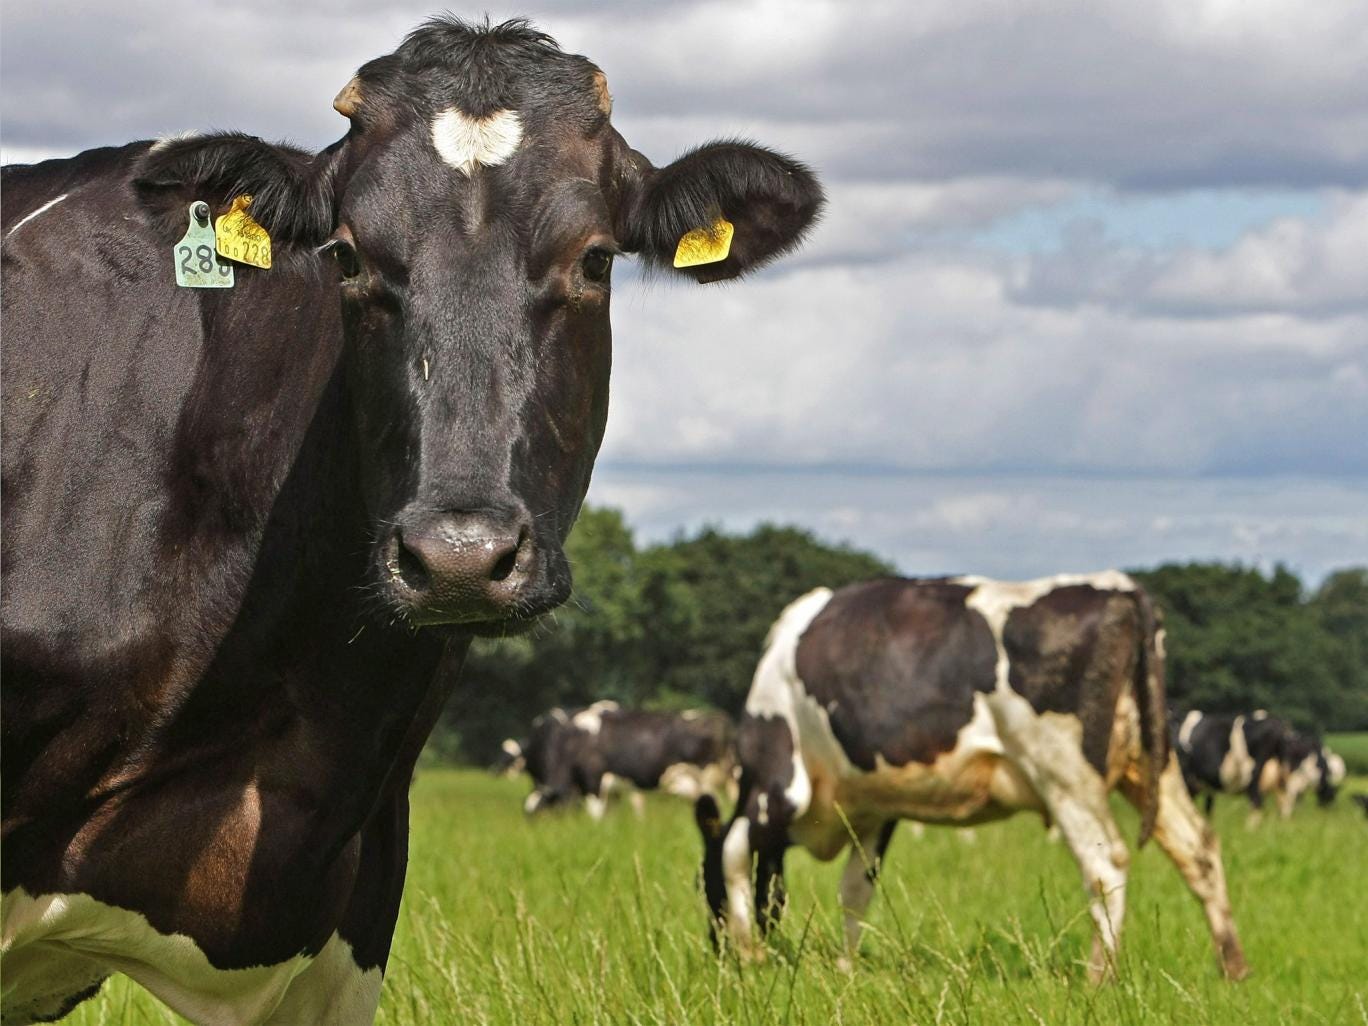 US academics have linked fracking to sickness and reproductive problems in livestock